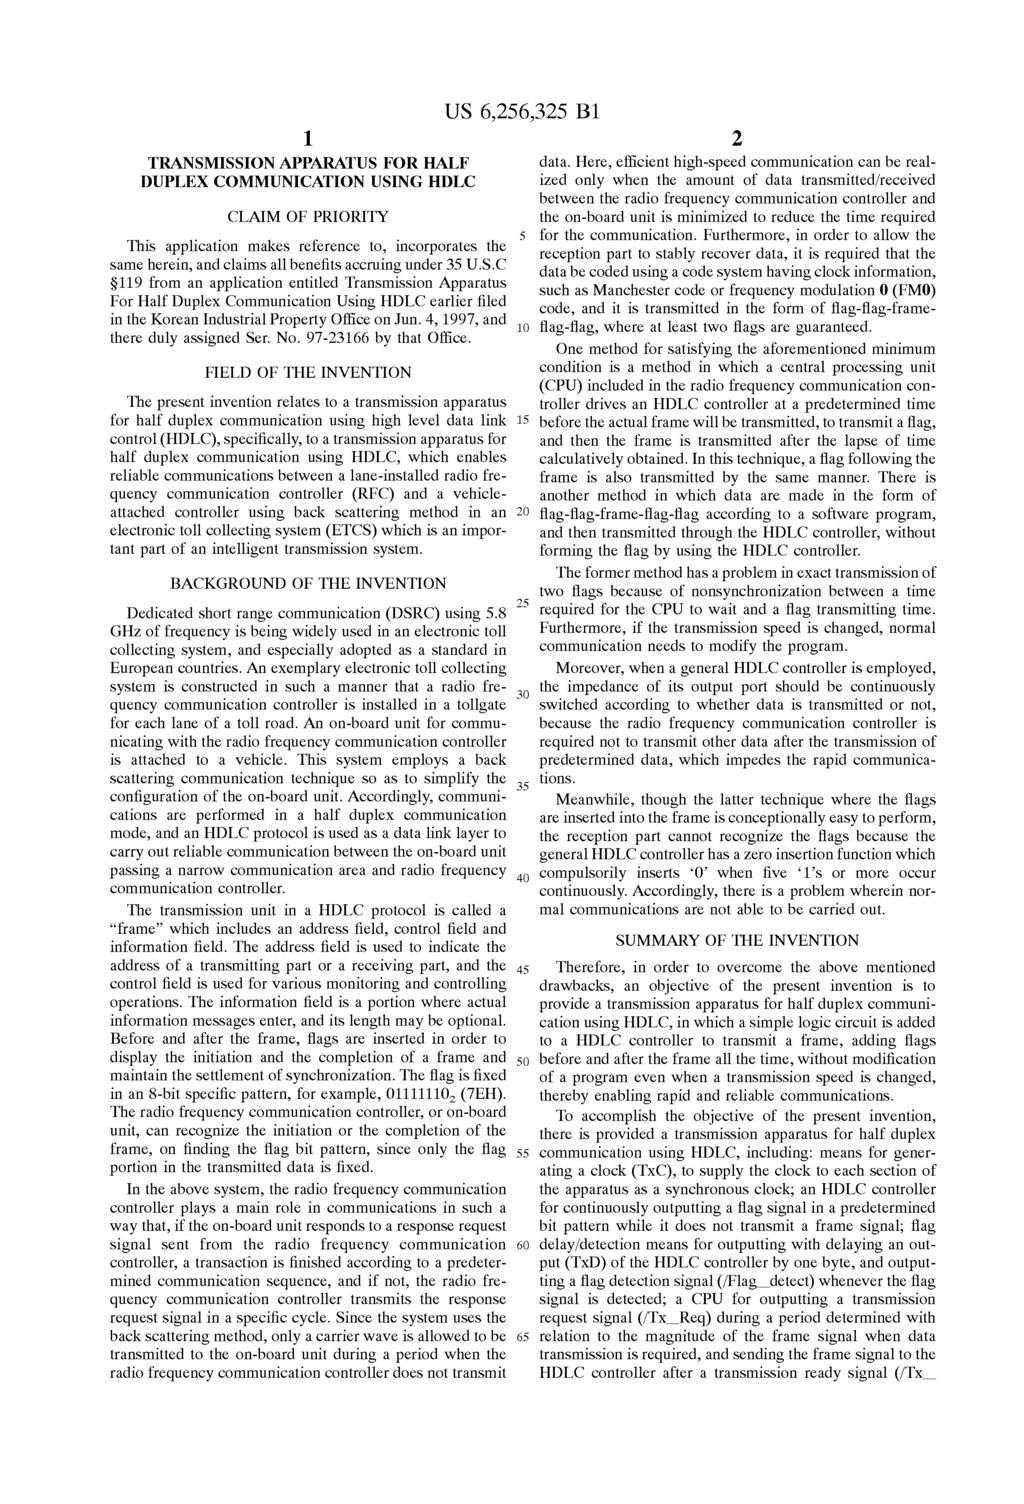 1 TRANSMISSION APPARATUS FOR HALF DUPLEX COMMUNICATION USING HDLC CLAIM OF PRIORITY This application makes reference to, incorporates the Same herein, and claims all benefits accruing under 35 U.S.C S119 from an application entitled Transmission Apparatus For Half Duplex Communication Using HDLC earlier filed in the Korean Industrial Property Office on Jun.